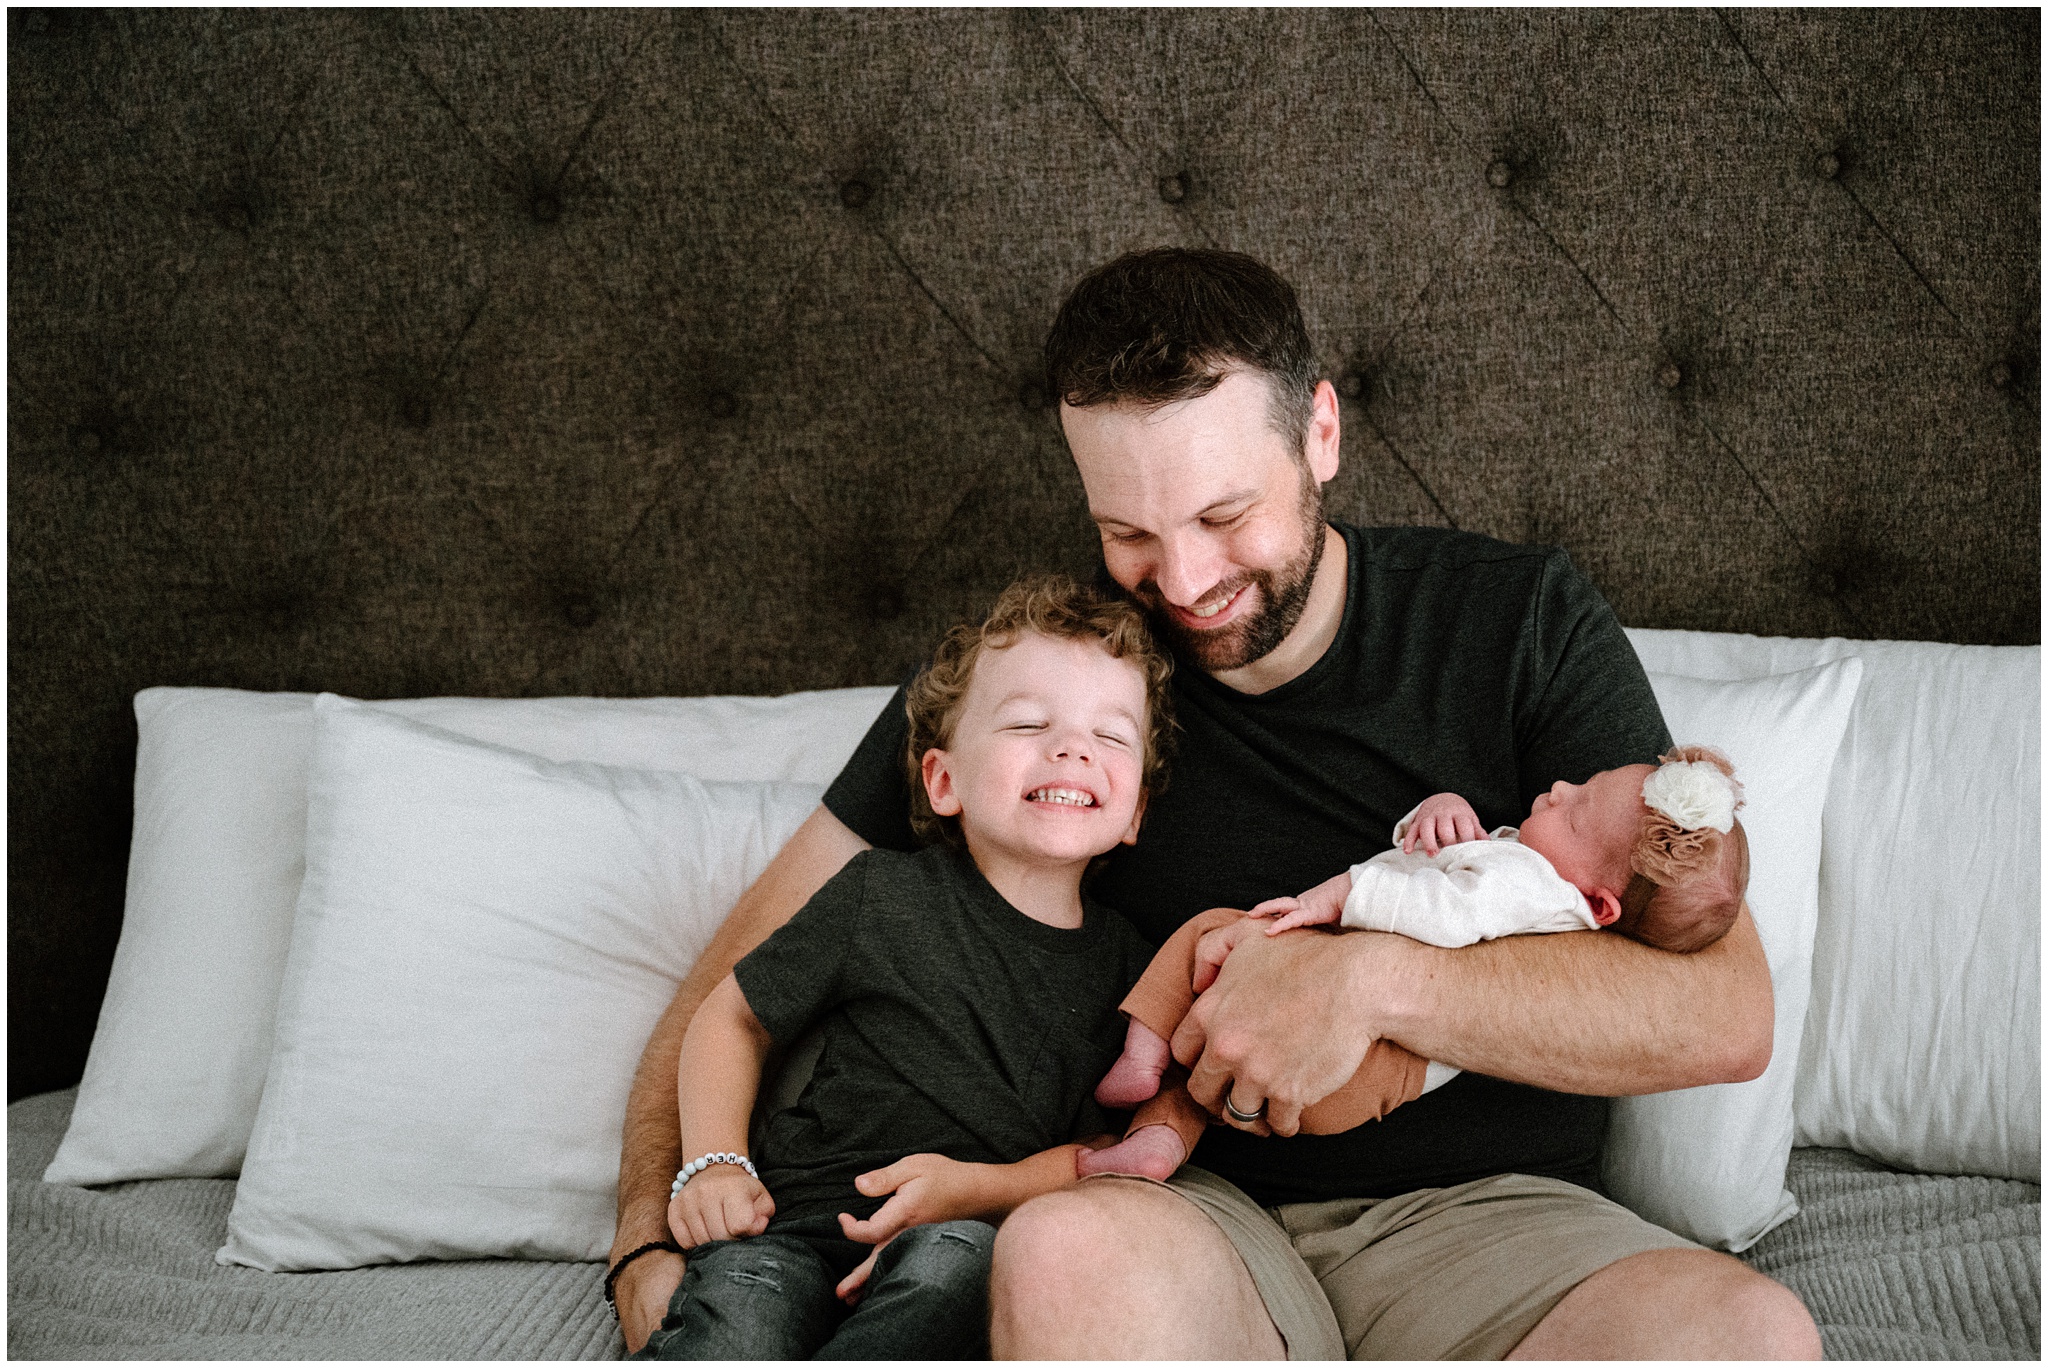 All smiles for dad and son holding new baby sister. Photo by Meg Newton Photography.